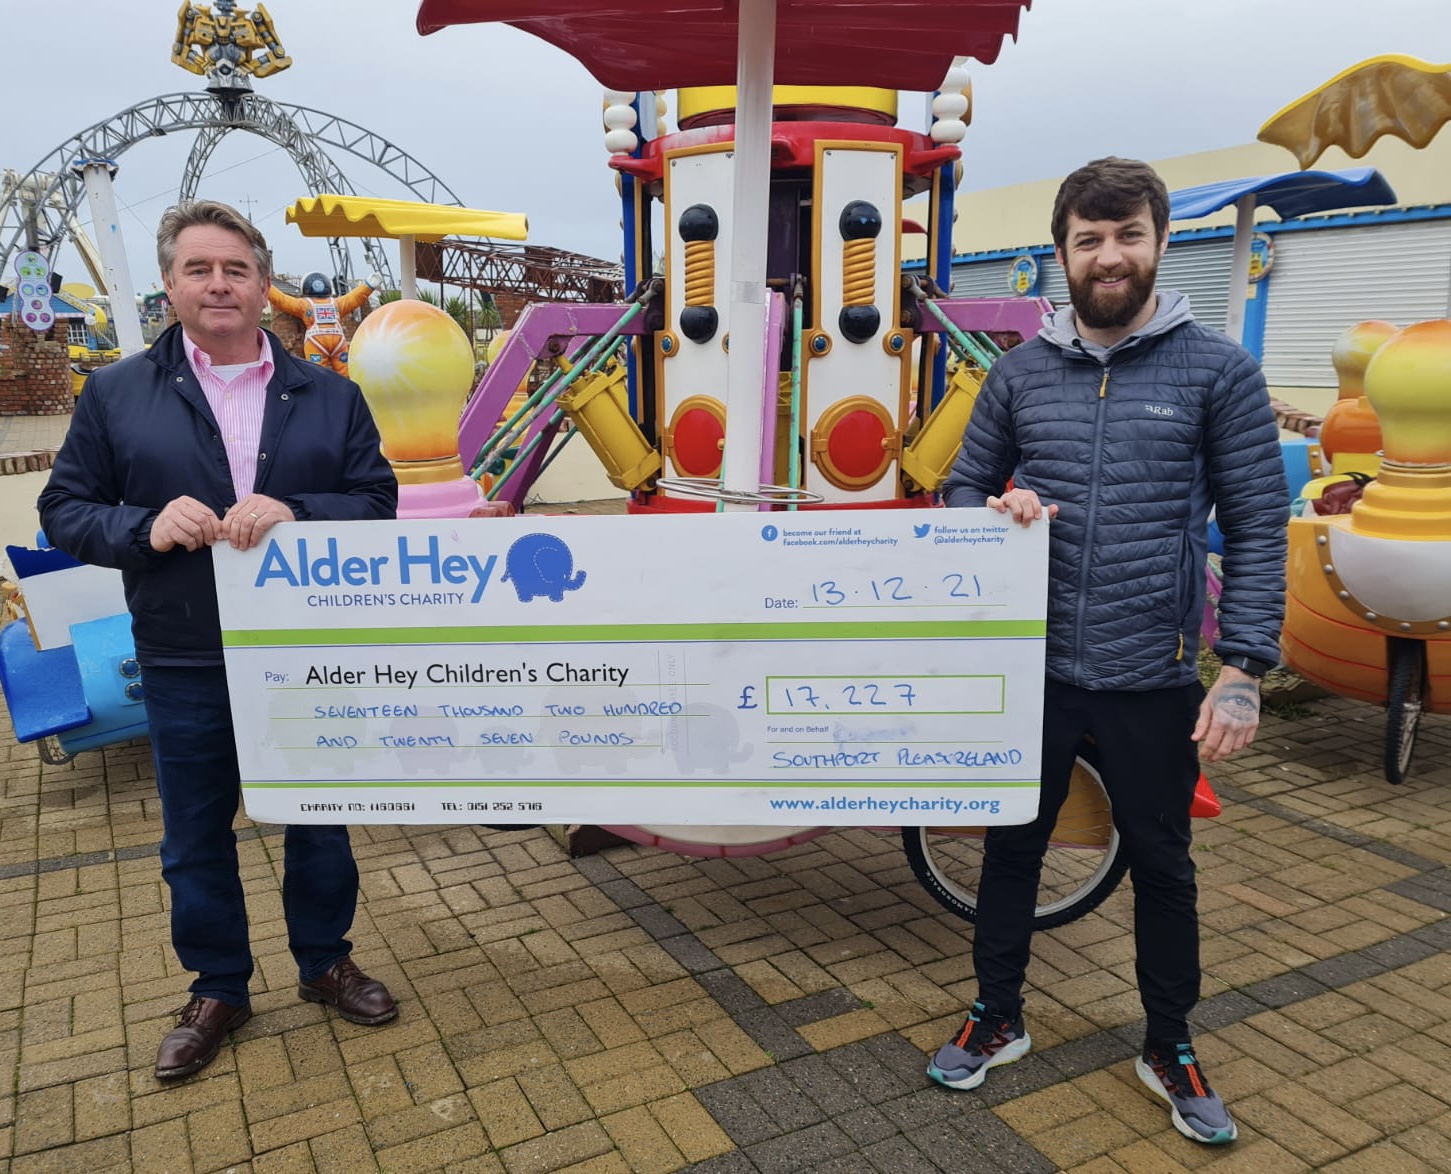 Southport Pleasureland owner Norman Wallis has raised funds for Alder Hey children's charity through hosting events at the park